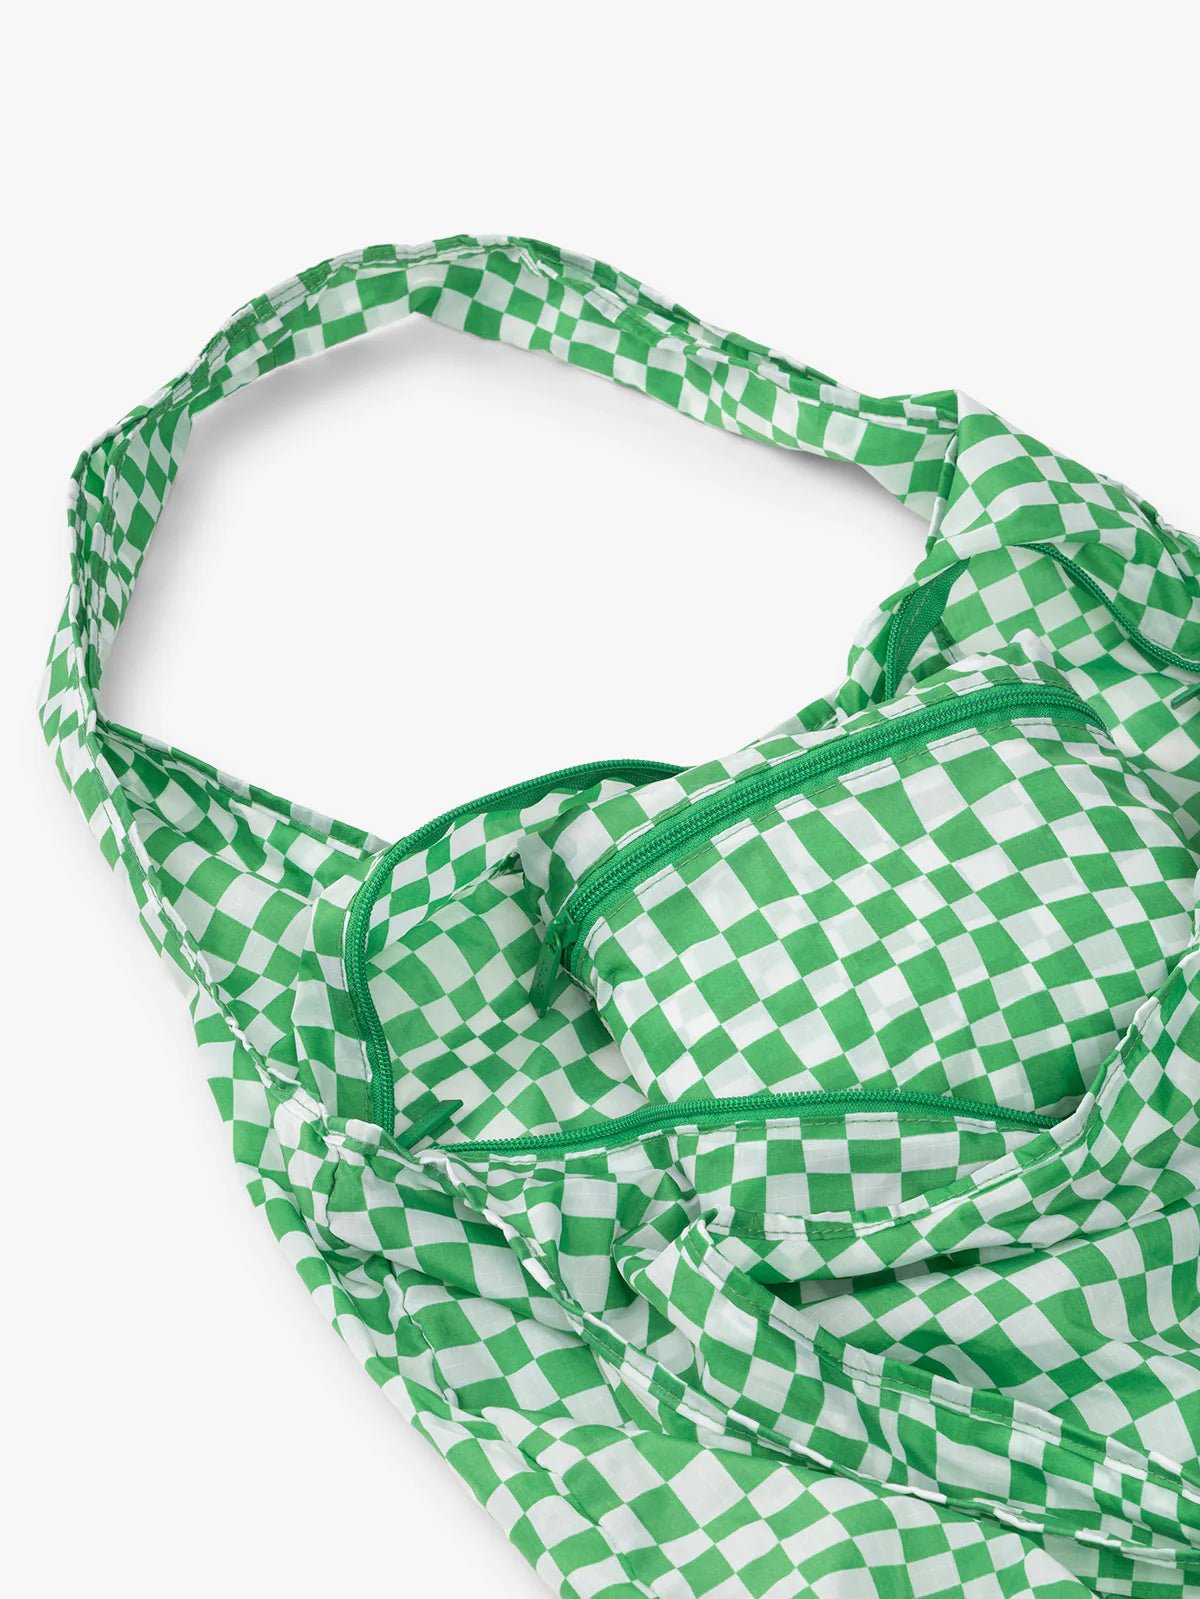 Green checkerboard print compakt tote bag part of compakt duo